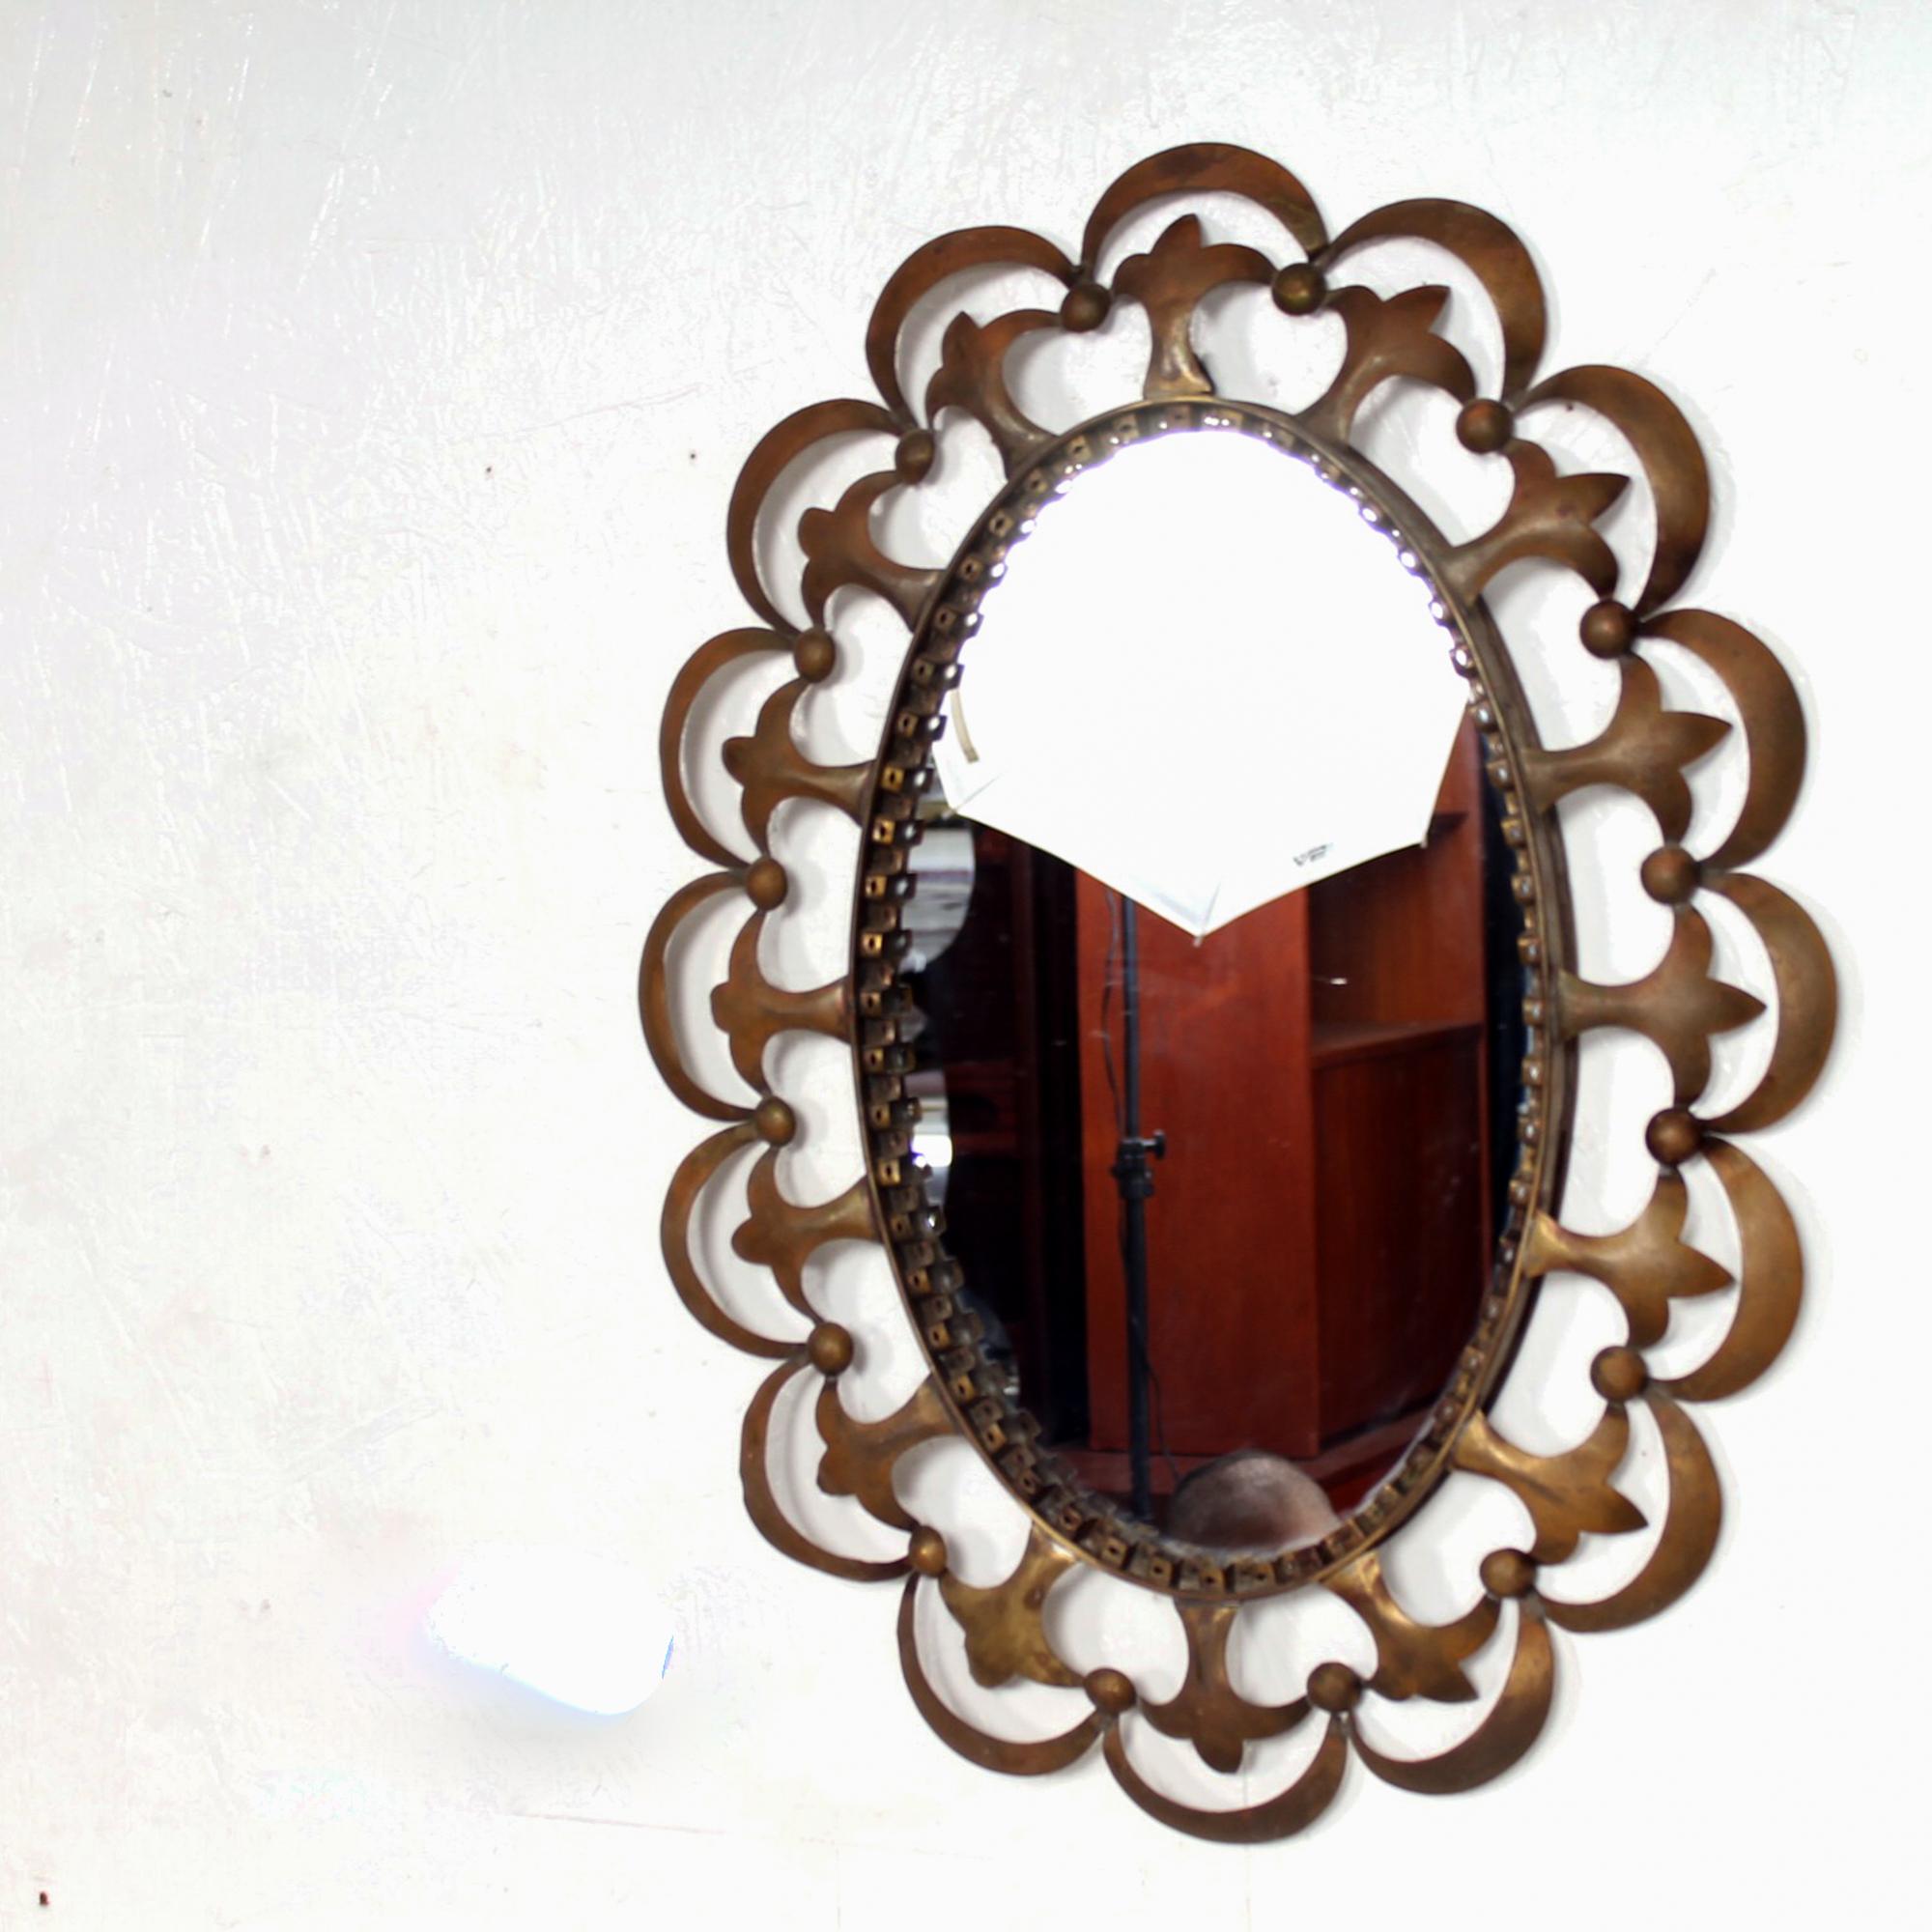 Hollywood Regency Labarge Fontana Arte style antique oval mirror in solid brass, circa 1940s.
Wonderfully ornate and simple in its presentation.
Unmarked and no information on the maker.
It can be hung horizontally or vertically.
Original